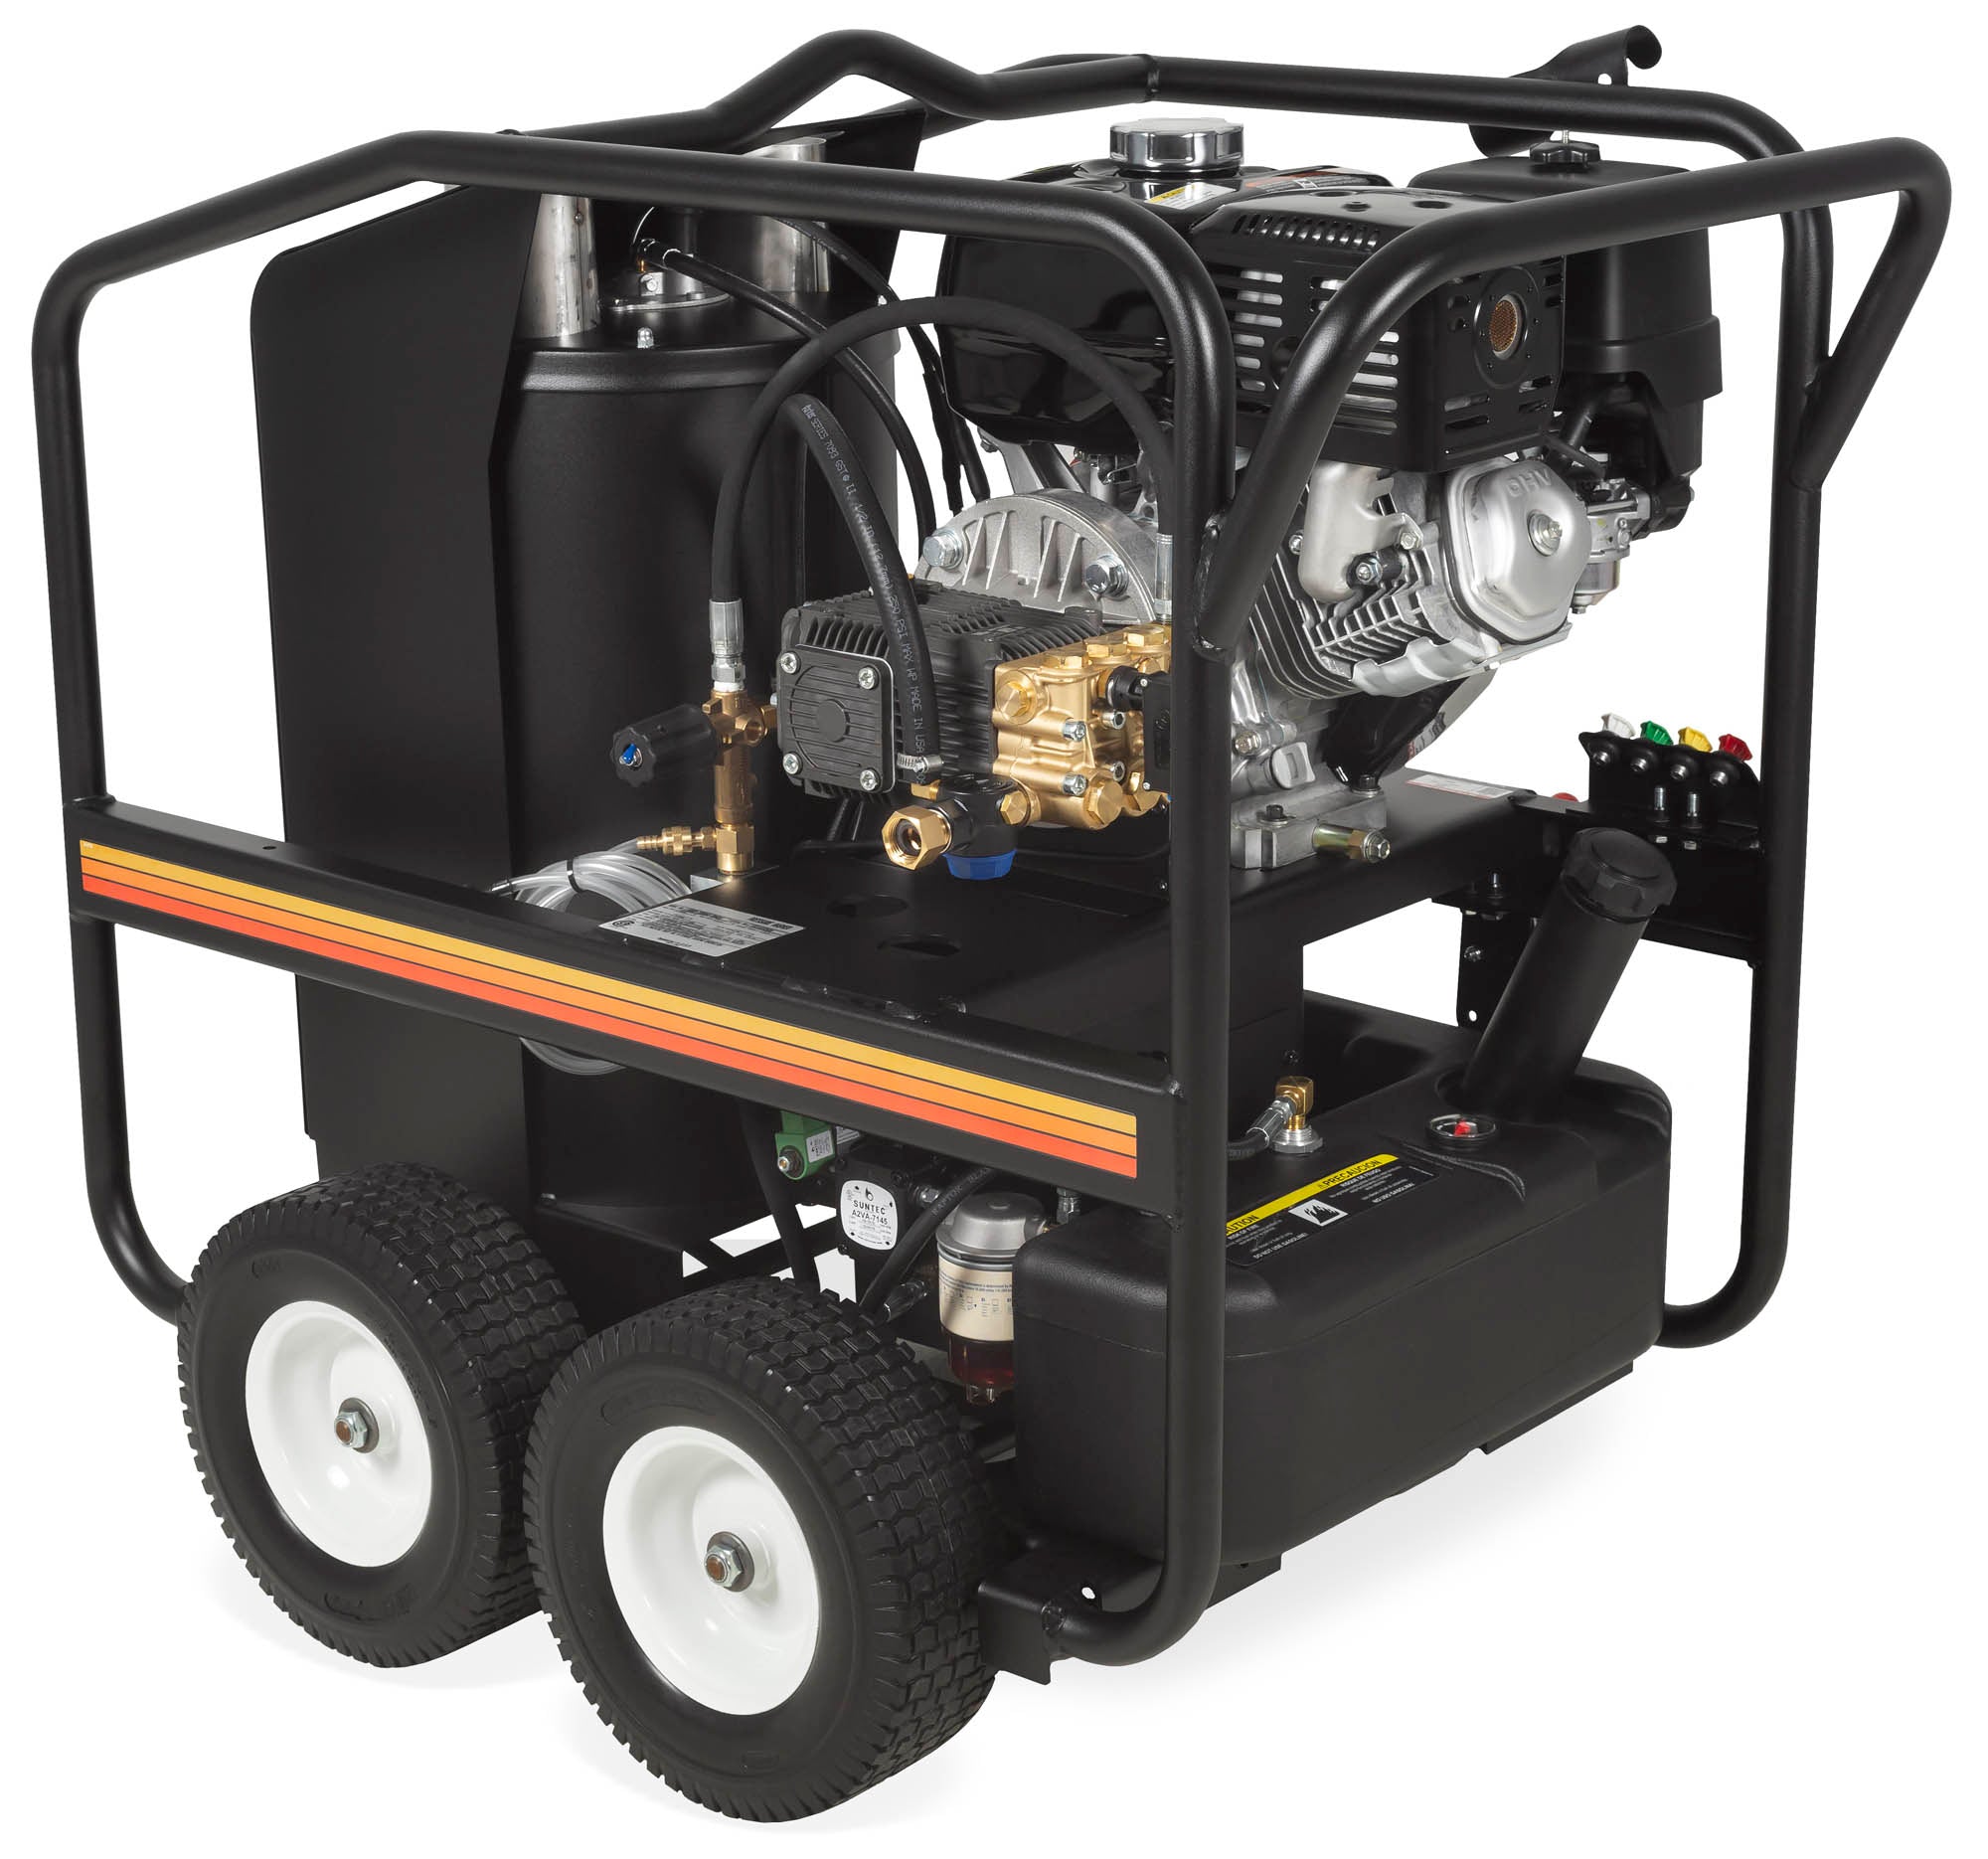 1075BE Compact, Gas Engine Hot Water Pressure Washer 4GPM @ 3500